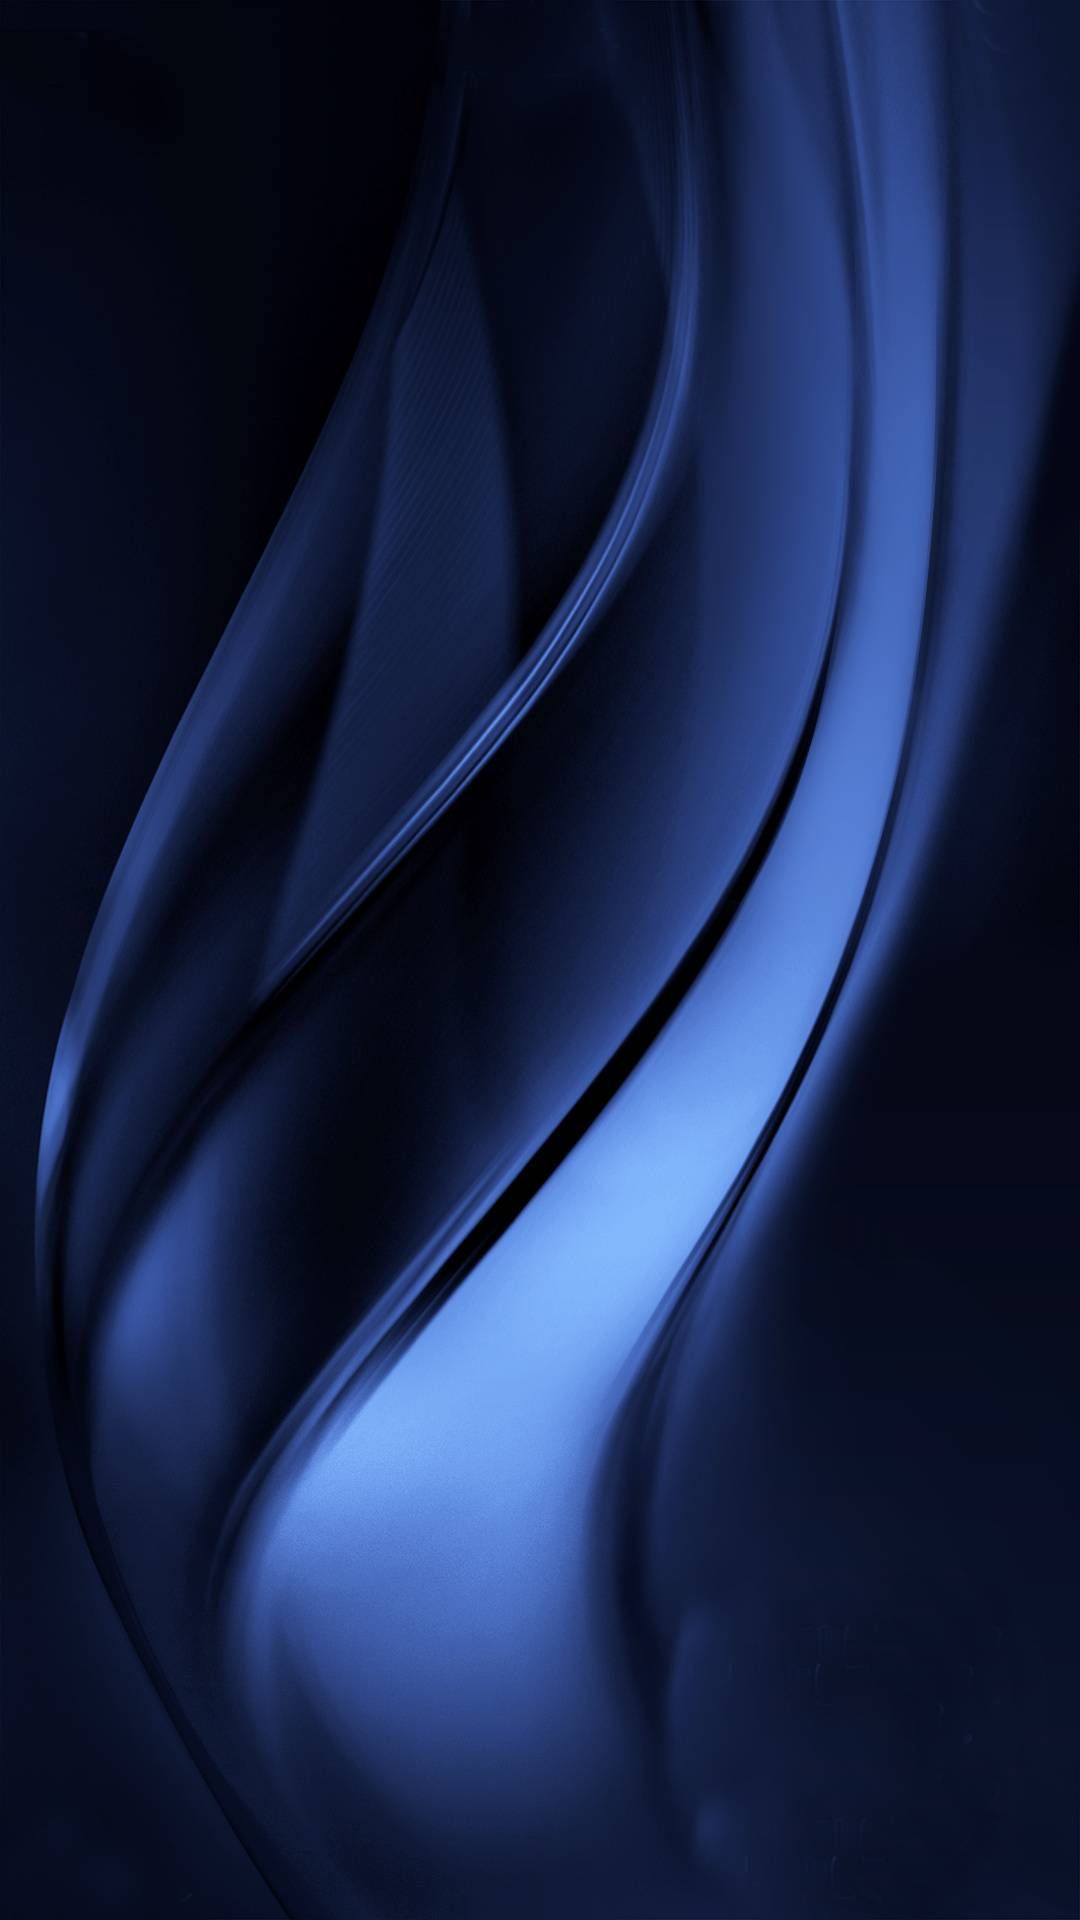 Dark Black And Blue Amoled Wallpapers - Wallpaper Cave